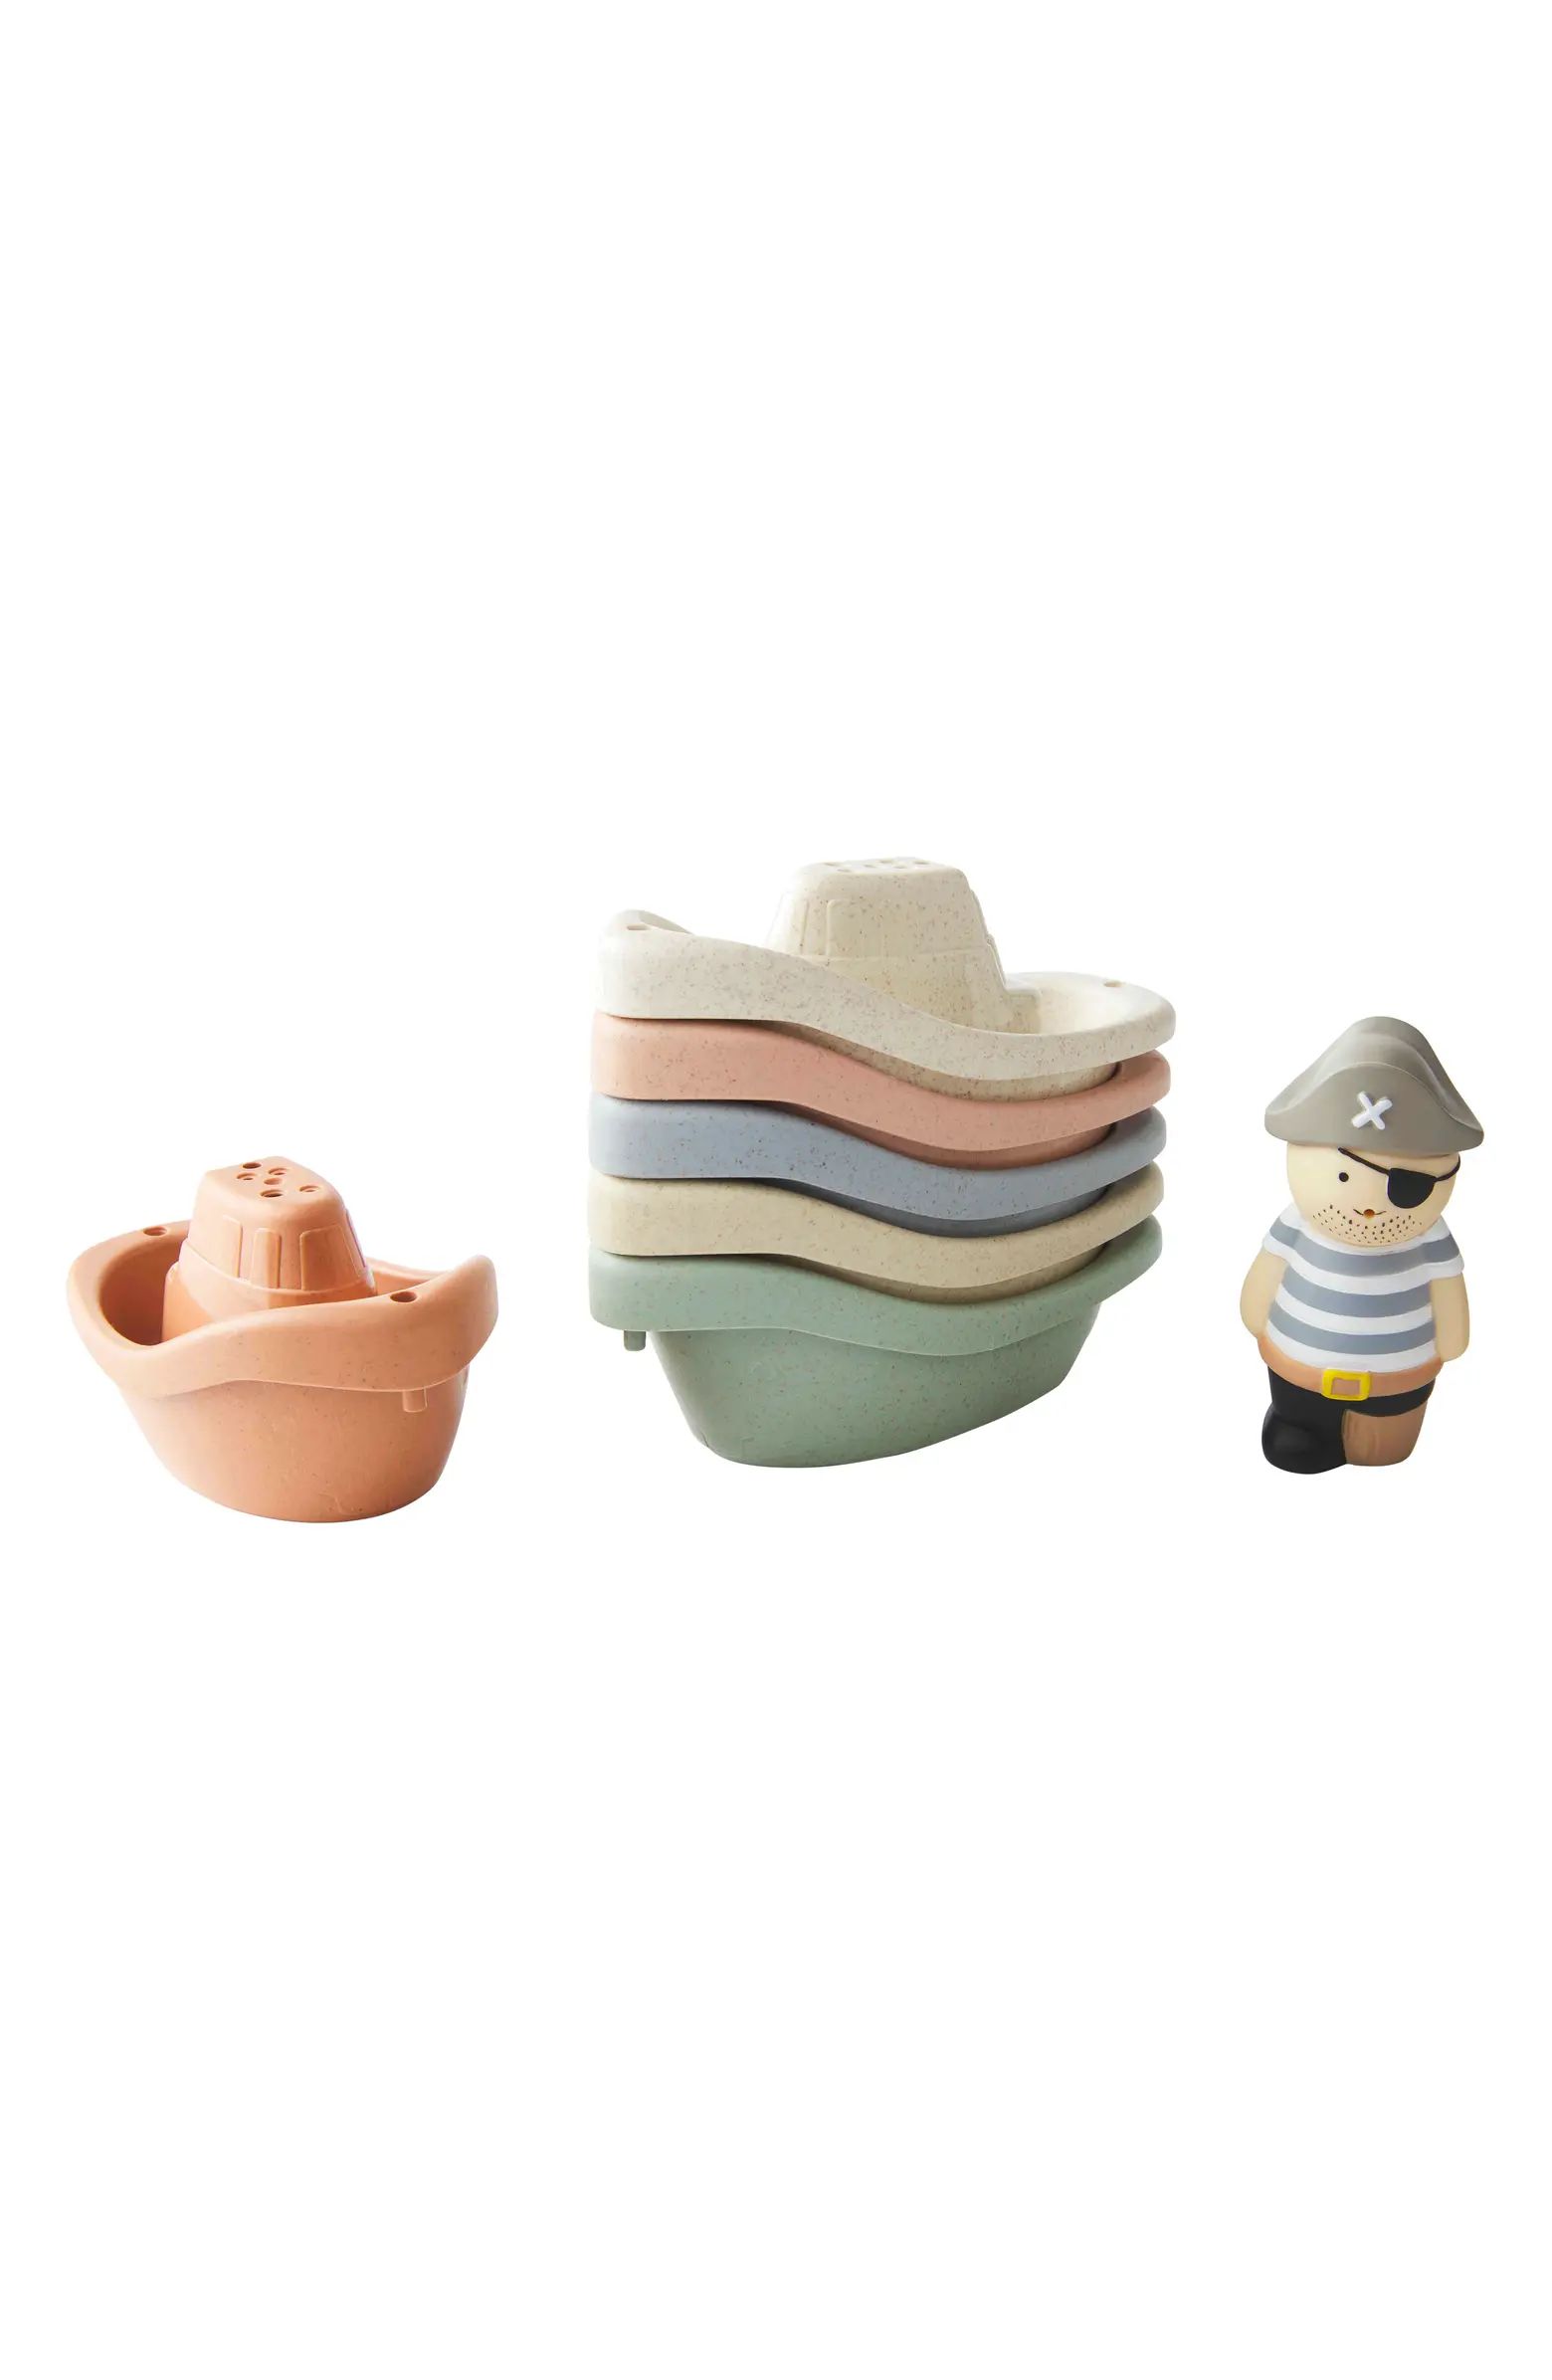 Mud Pie Pirate Stacking Boat Bath Toy Set | Nordstrom | Nordstrom